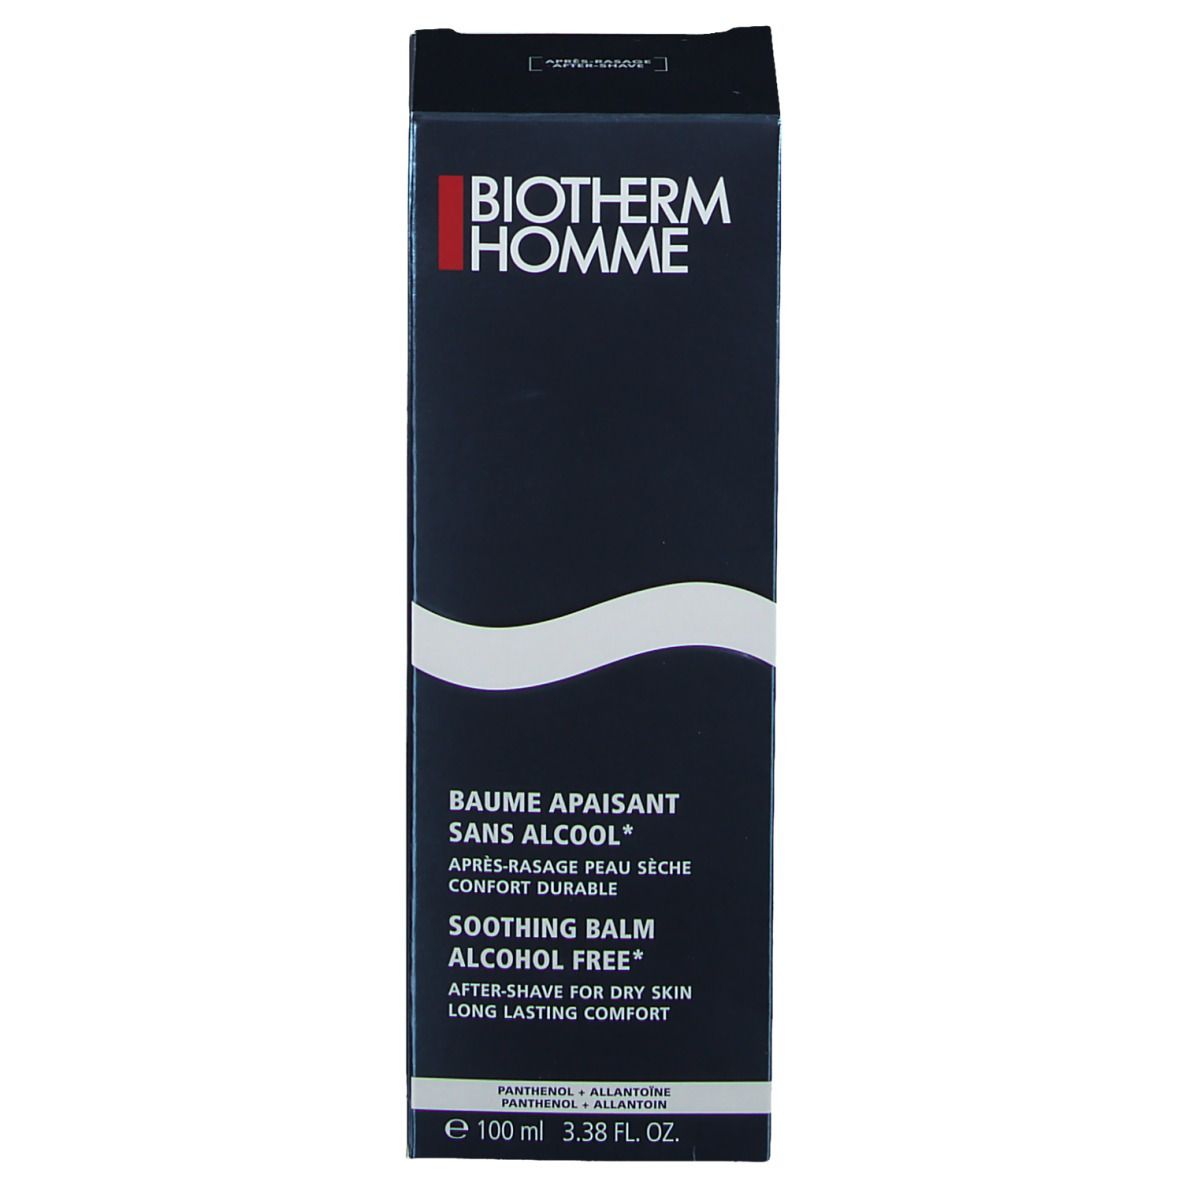 Biotherm Homme Baume Apaisant